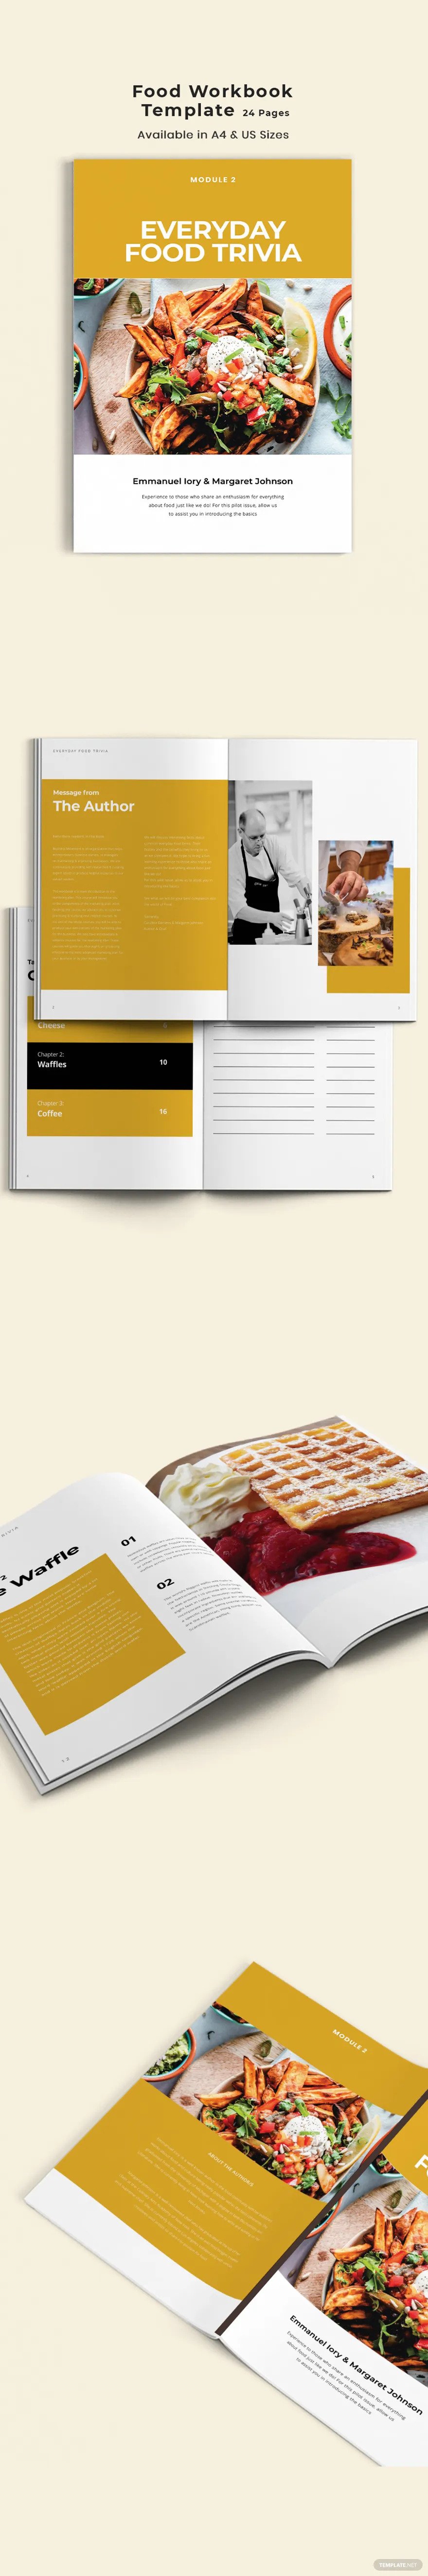 food-workbook-ideas-and-examples